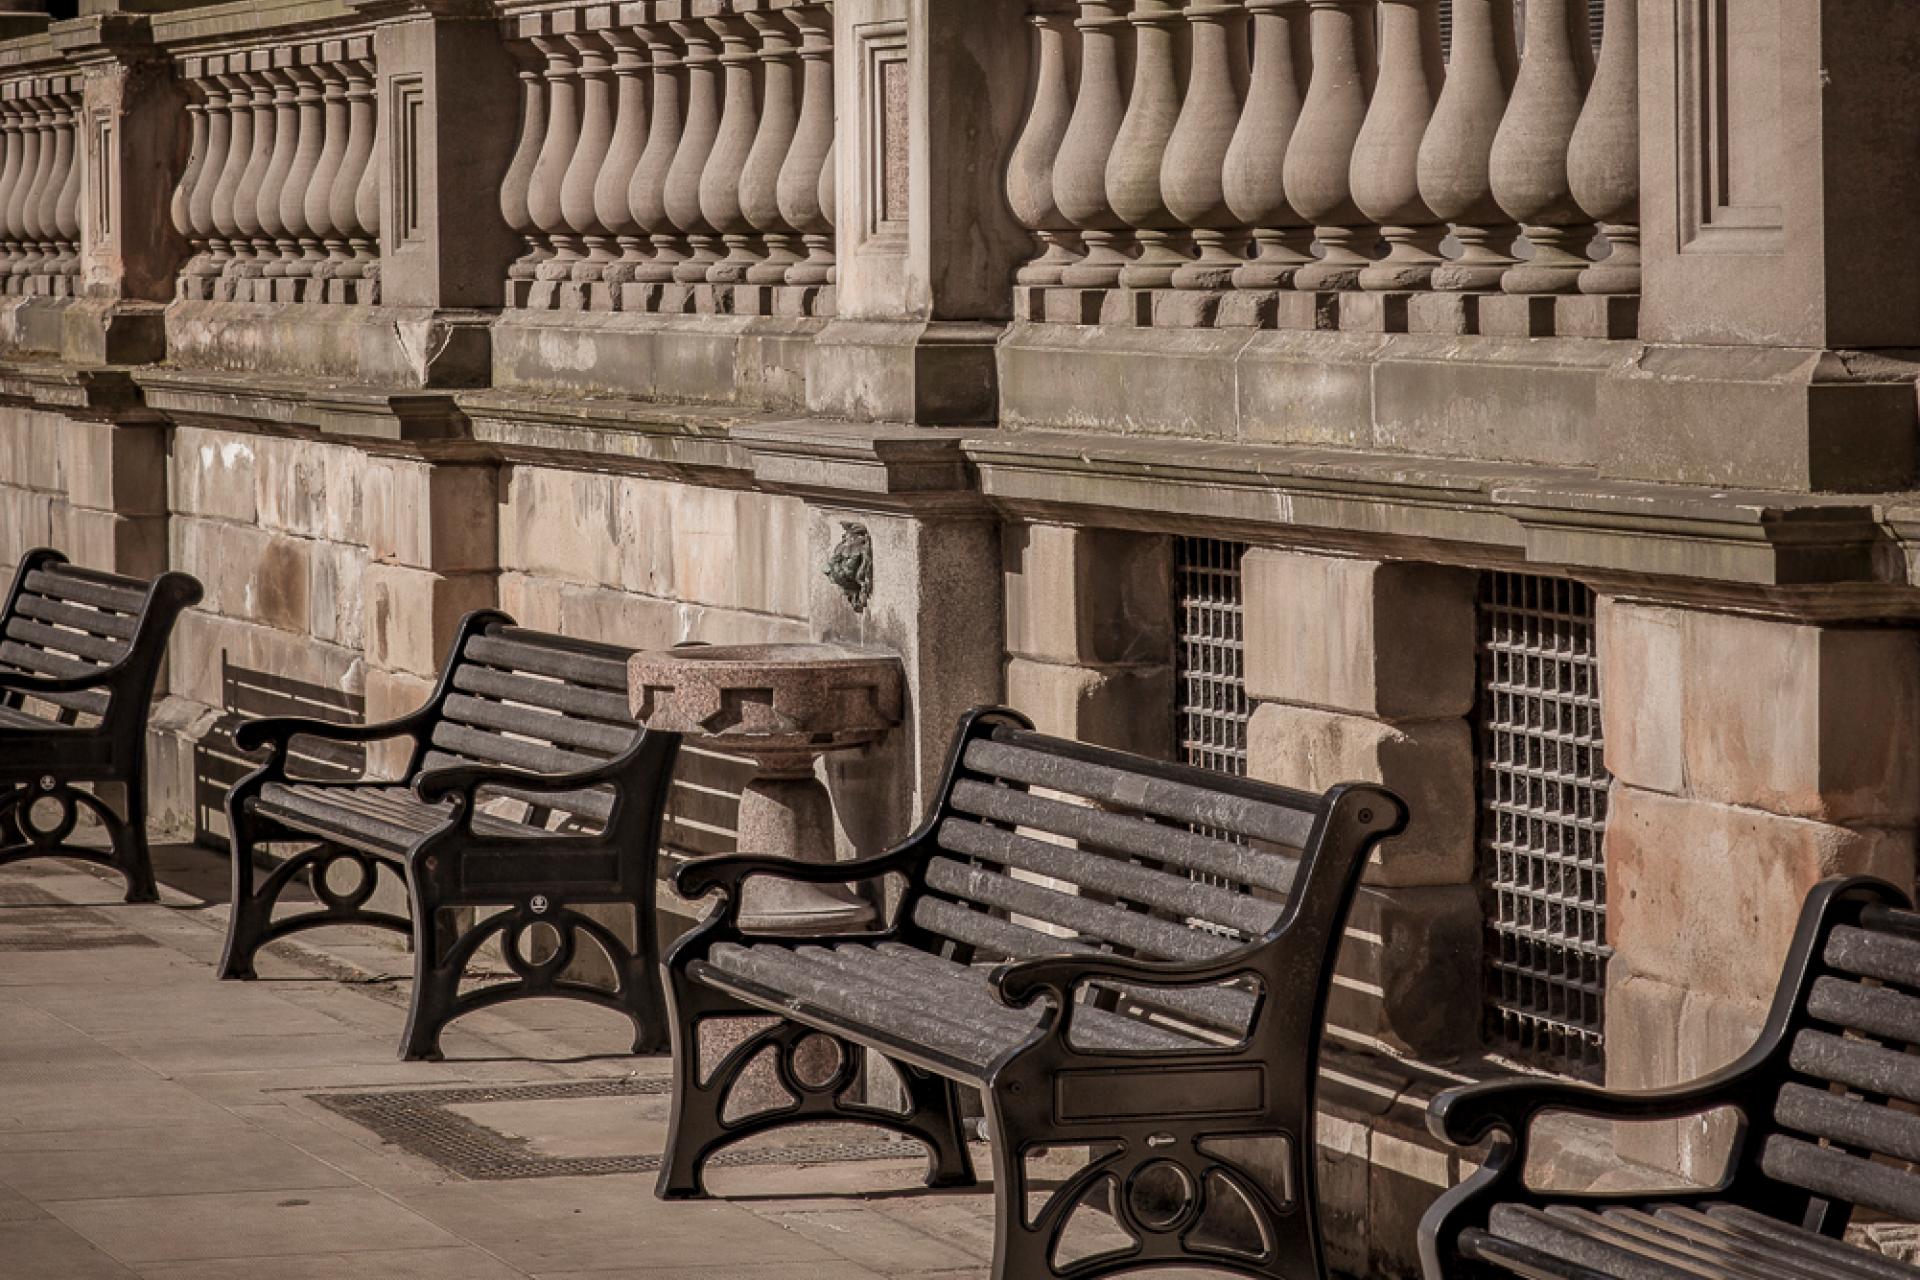 Benches of Old College